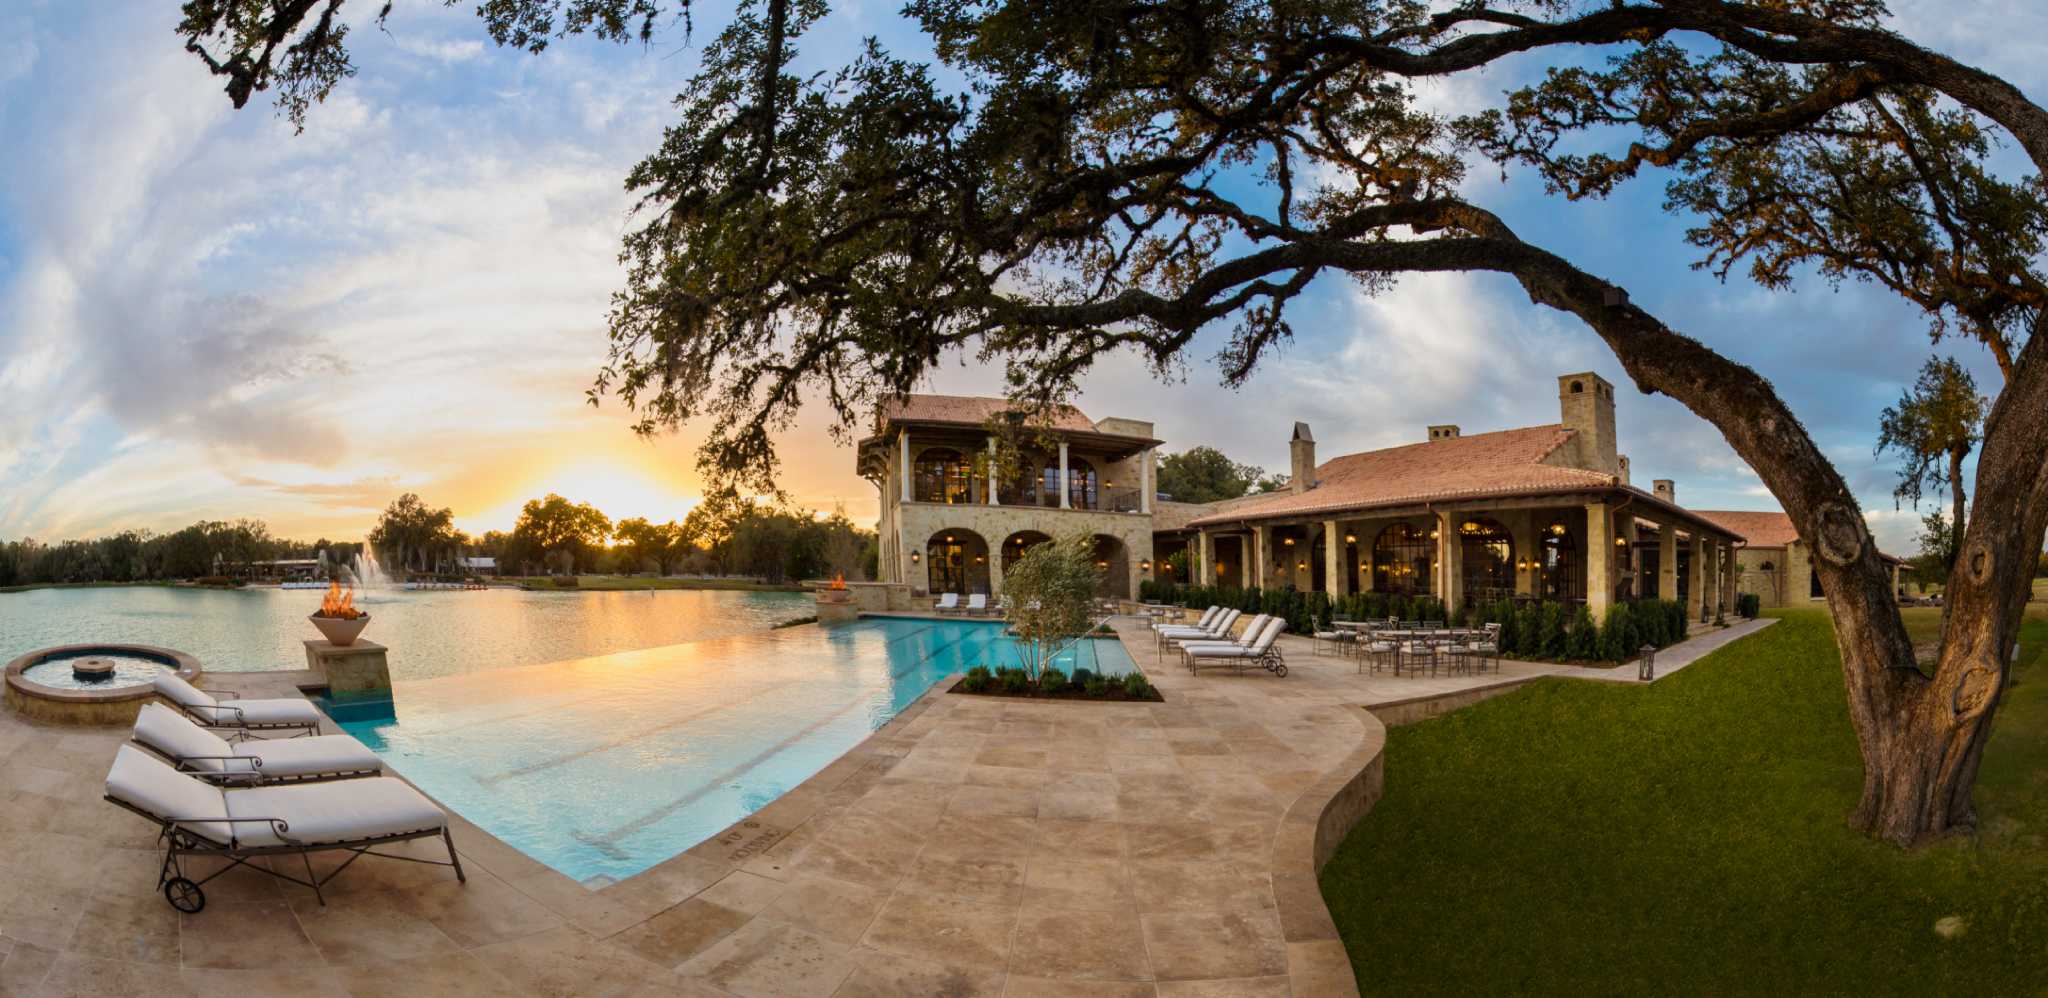 Oil retreat from the 50s becomes a new, modern country club - Houston Chronicle2048 x 998